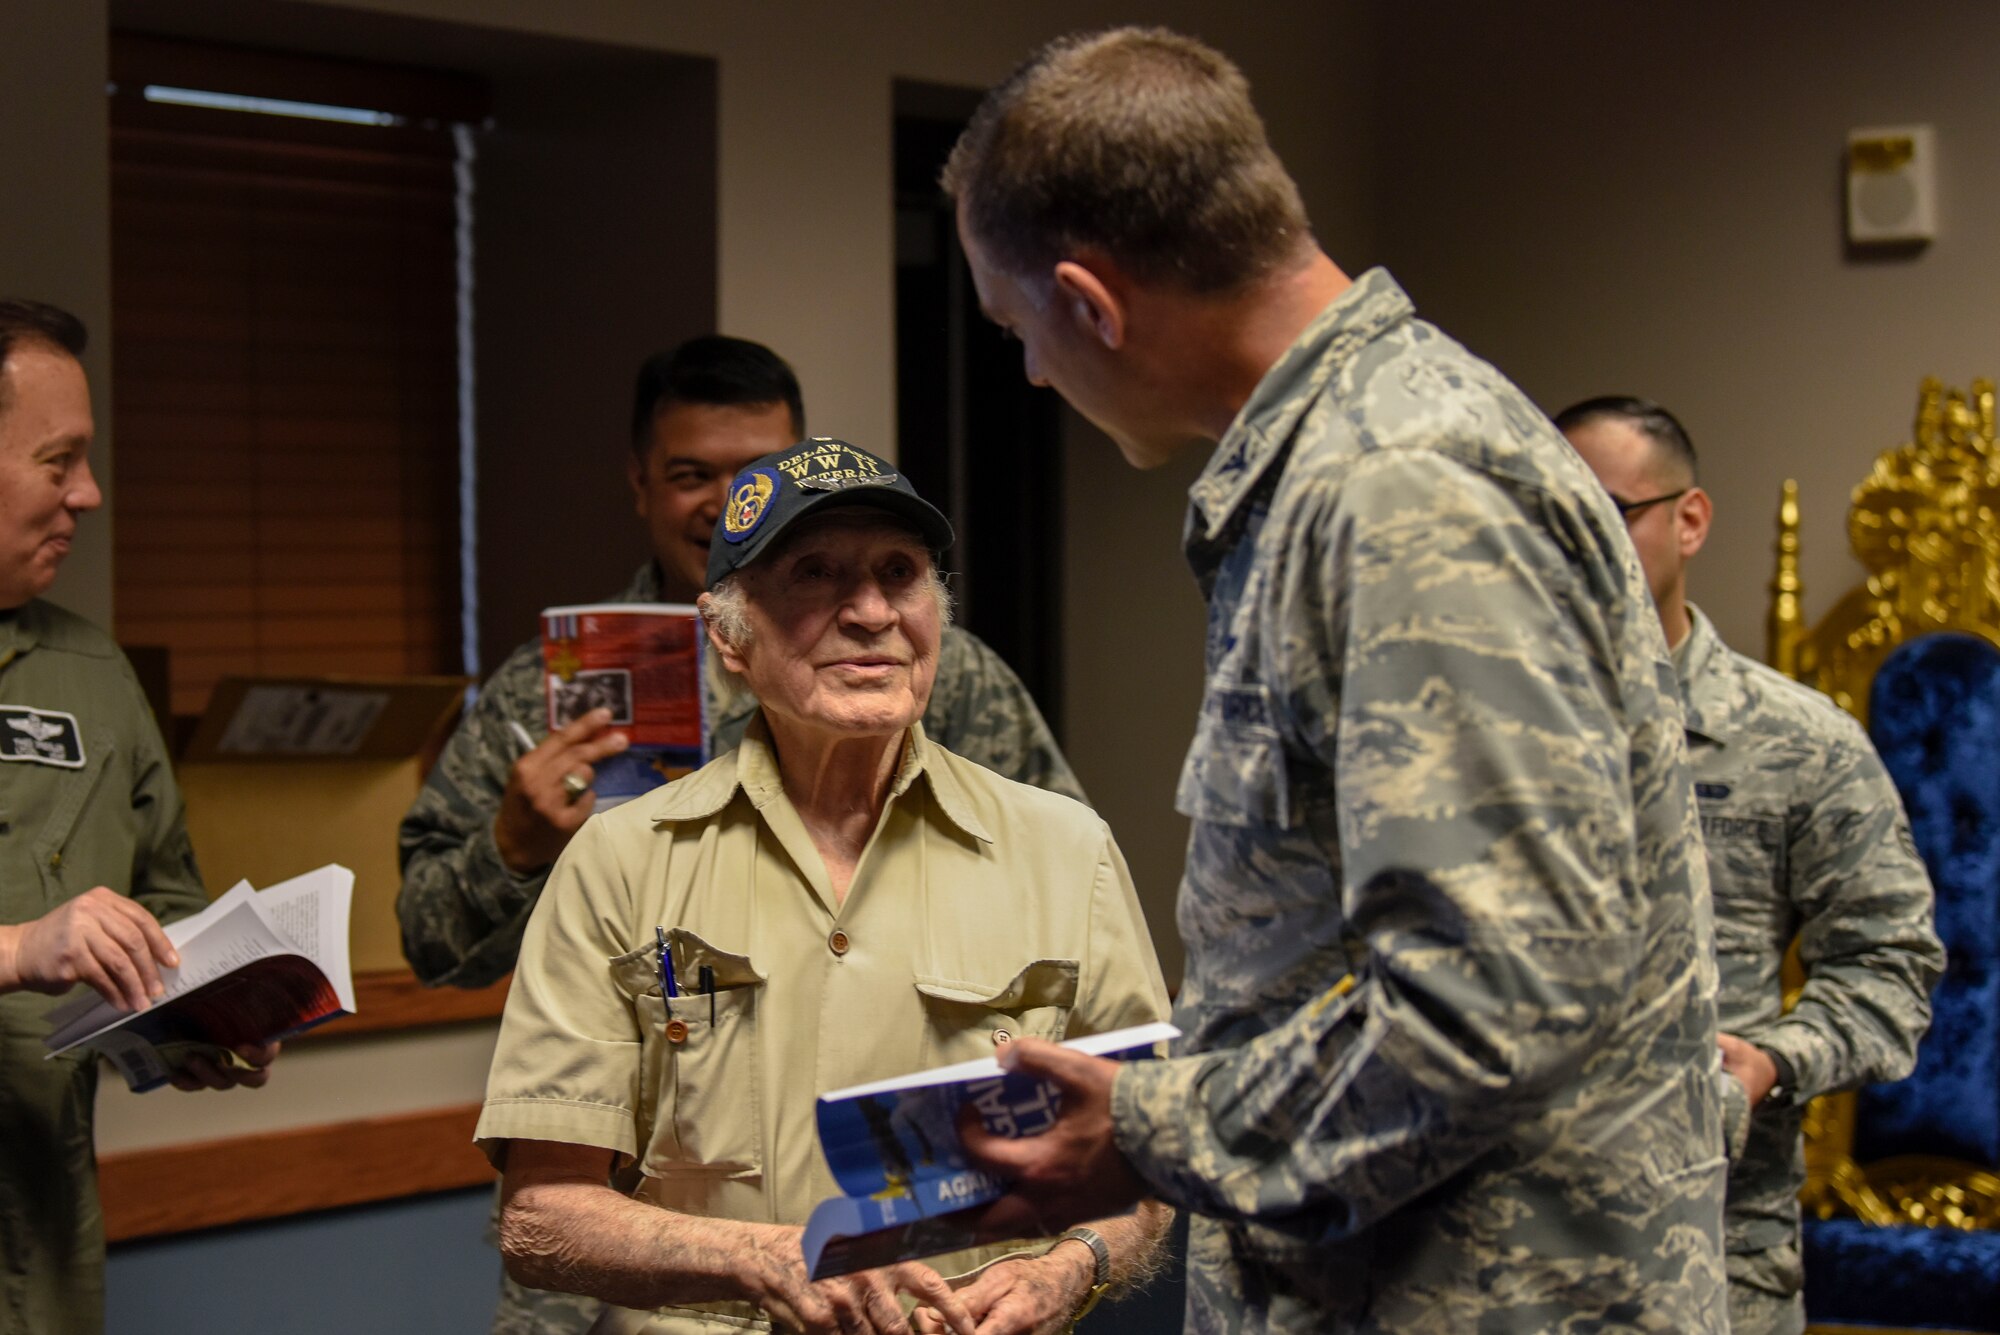 Col. Ethan Griffin, 436th Airlift Wing commander, gets his copy of “Against All Odds: The Firmani Story” signed by retired Army Air Corps 1st Lt. Ray Firmani, World War II B-17 pilot, during the quarterly Hangar Talk May 10, 2018, at Dover Air Force Base, Del. The book is an account of Firmani’s experiences as a pilot during World War II. (U.S. Air Force photo by Airman 1st Class Zoe M. Wockenfuss)